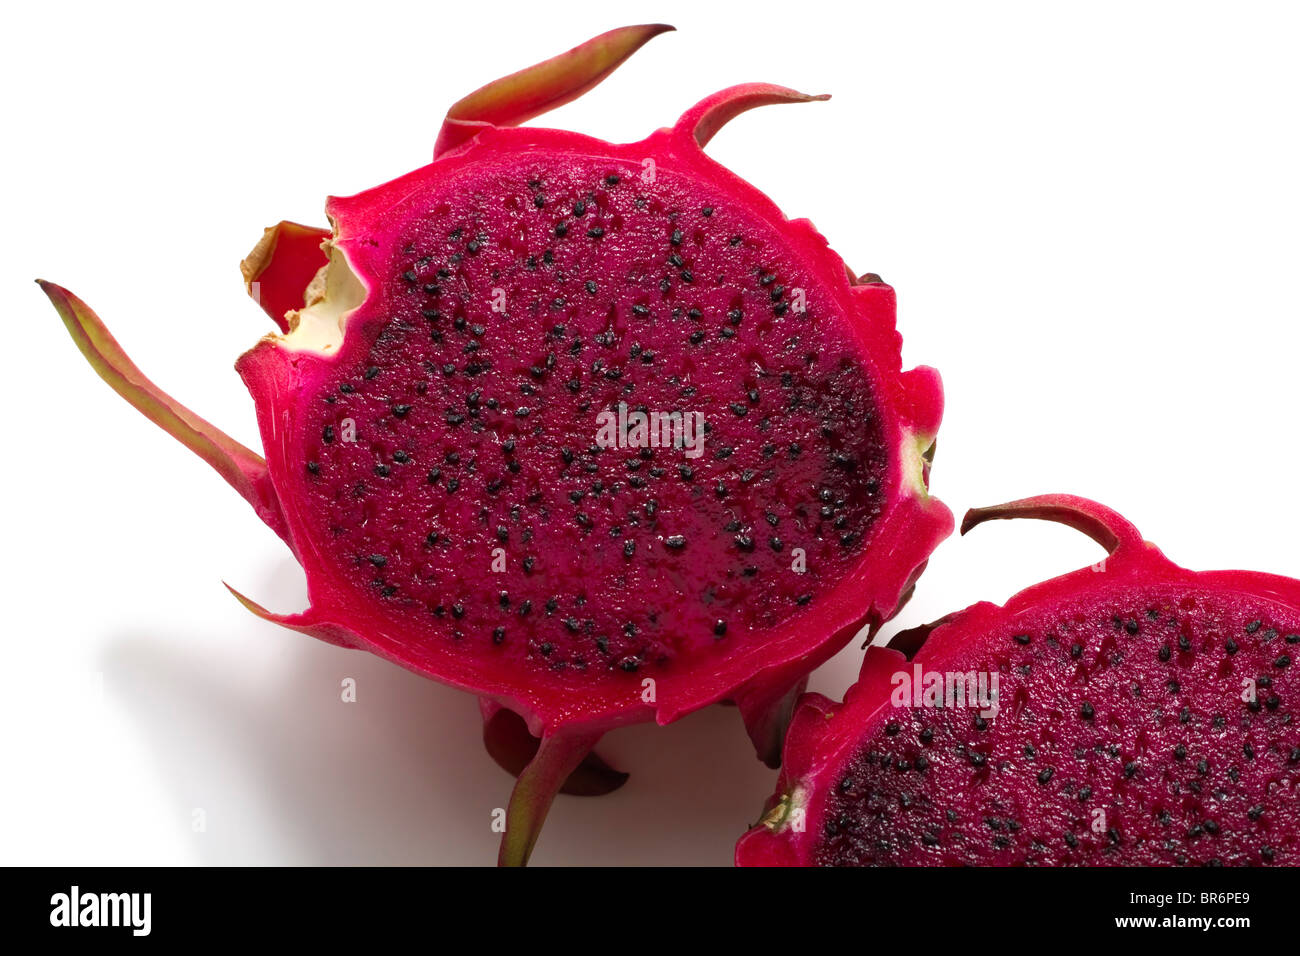 Delicious juicy exotic tropical red dragonfruit or pitaya with red flesh and black seeds Stock Photo